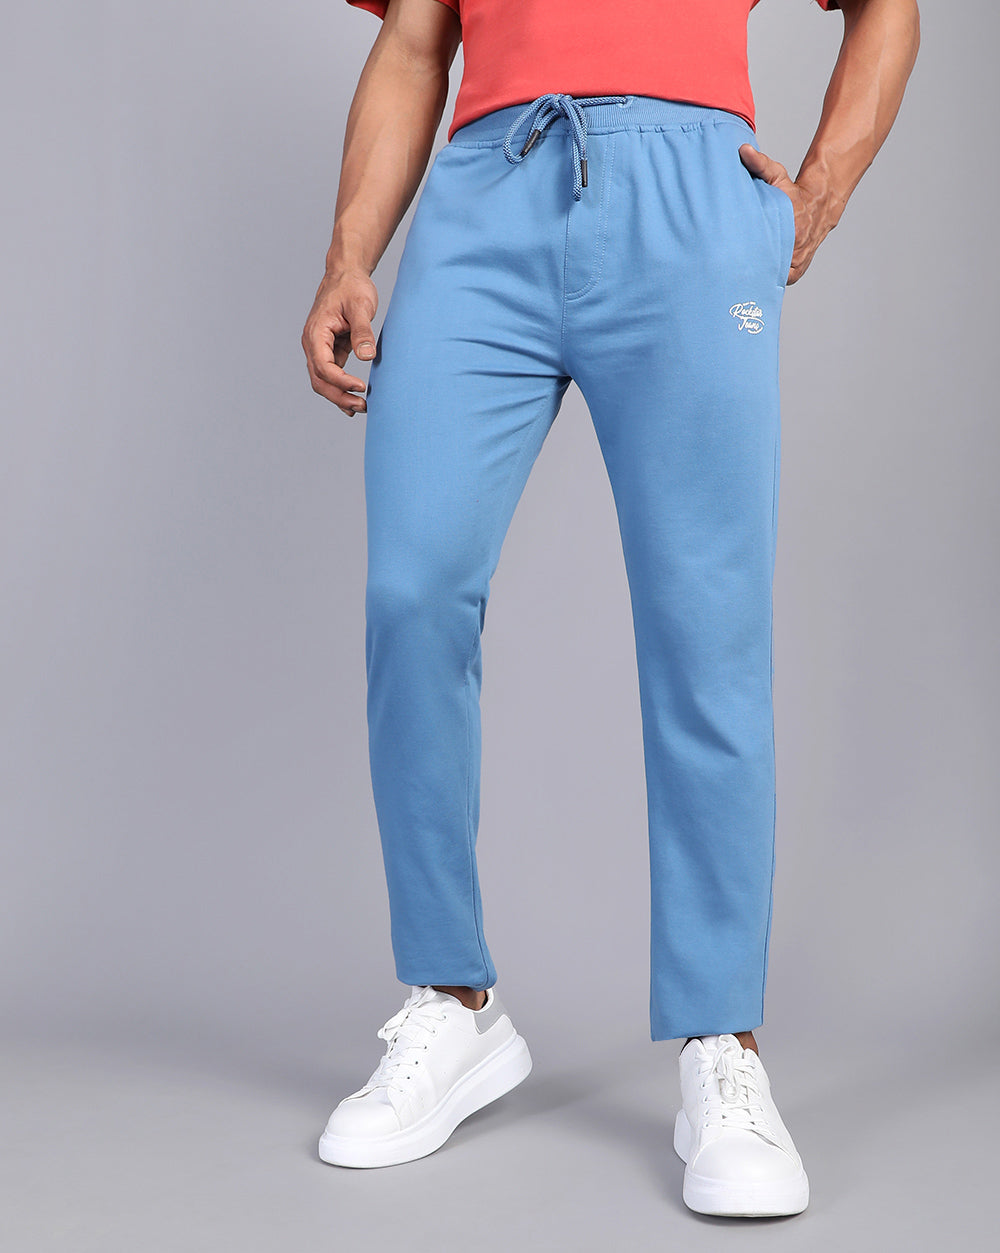 Light Blue Womens Trousers  Buy Light Blue Womens Trousers Online at Best  Prices In India  Flipkartcom